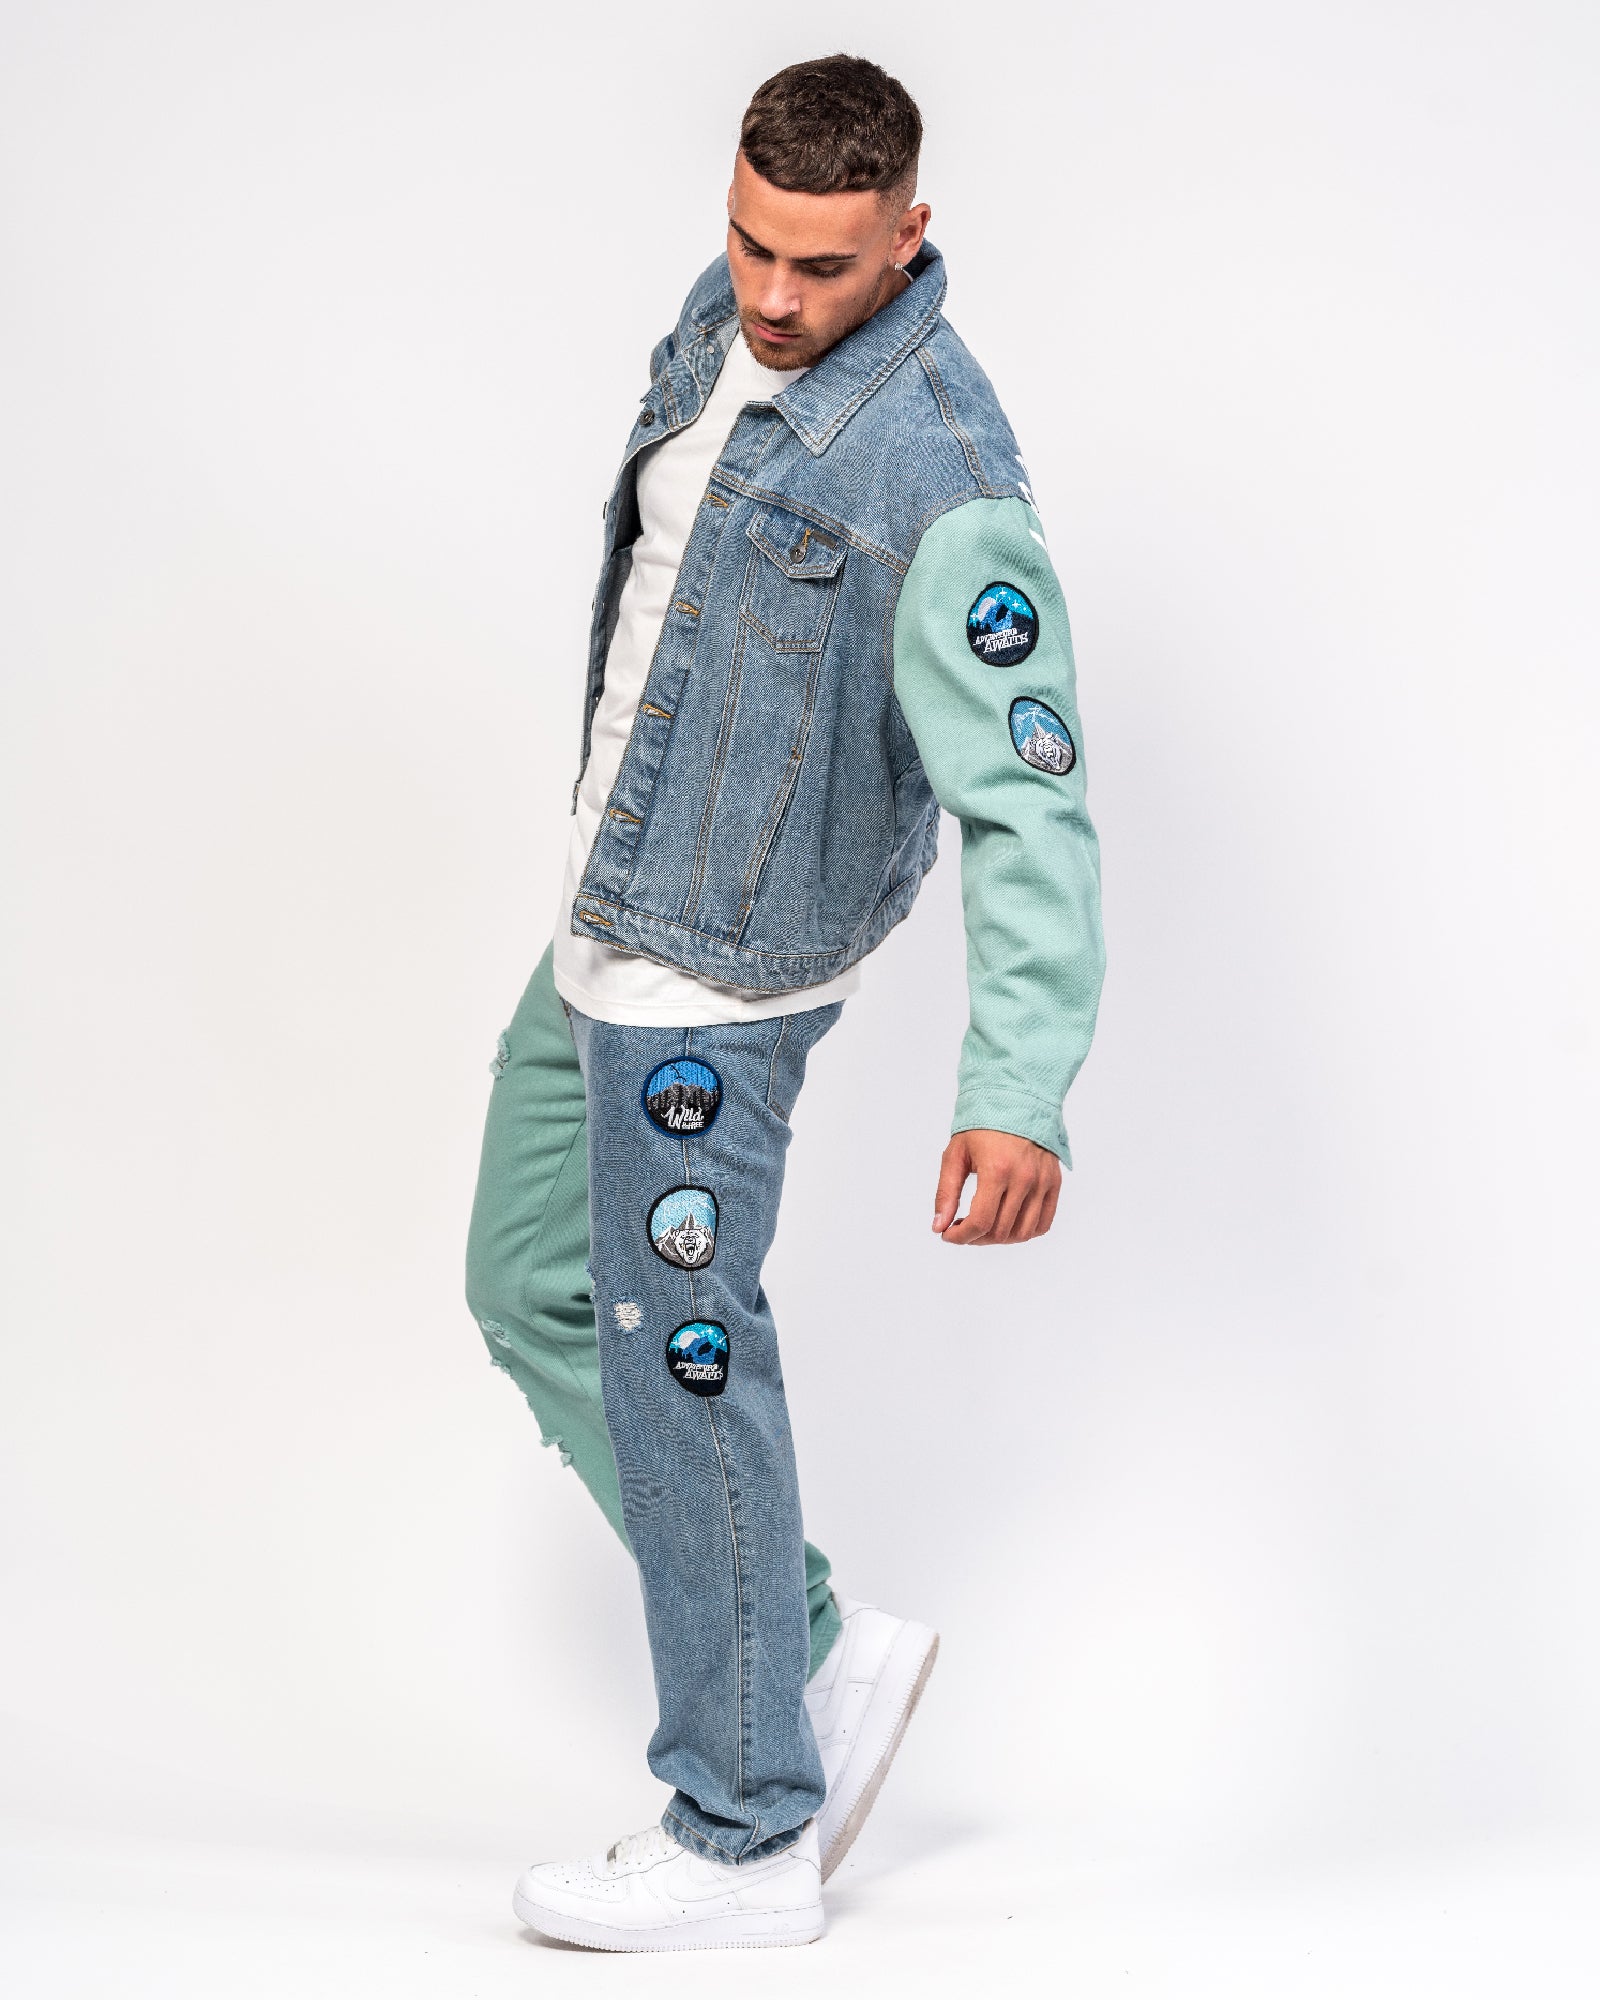 Montana Spliced Denim Jacket with Wilderness Embroidery Patches